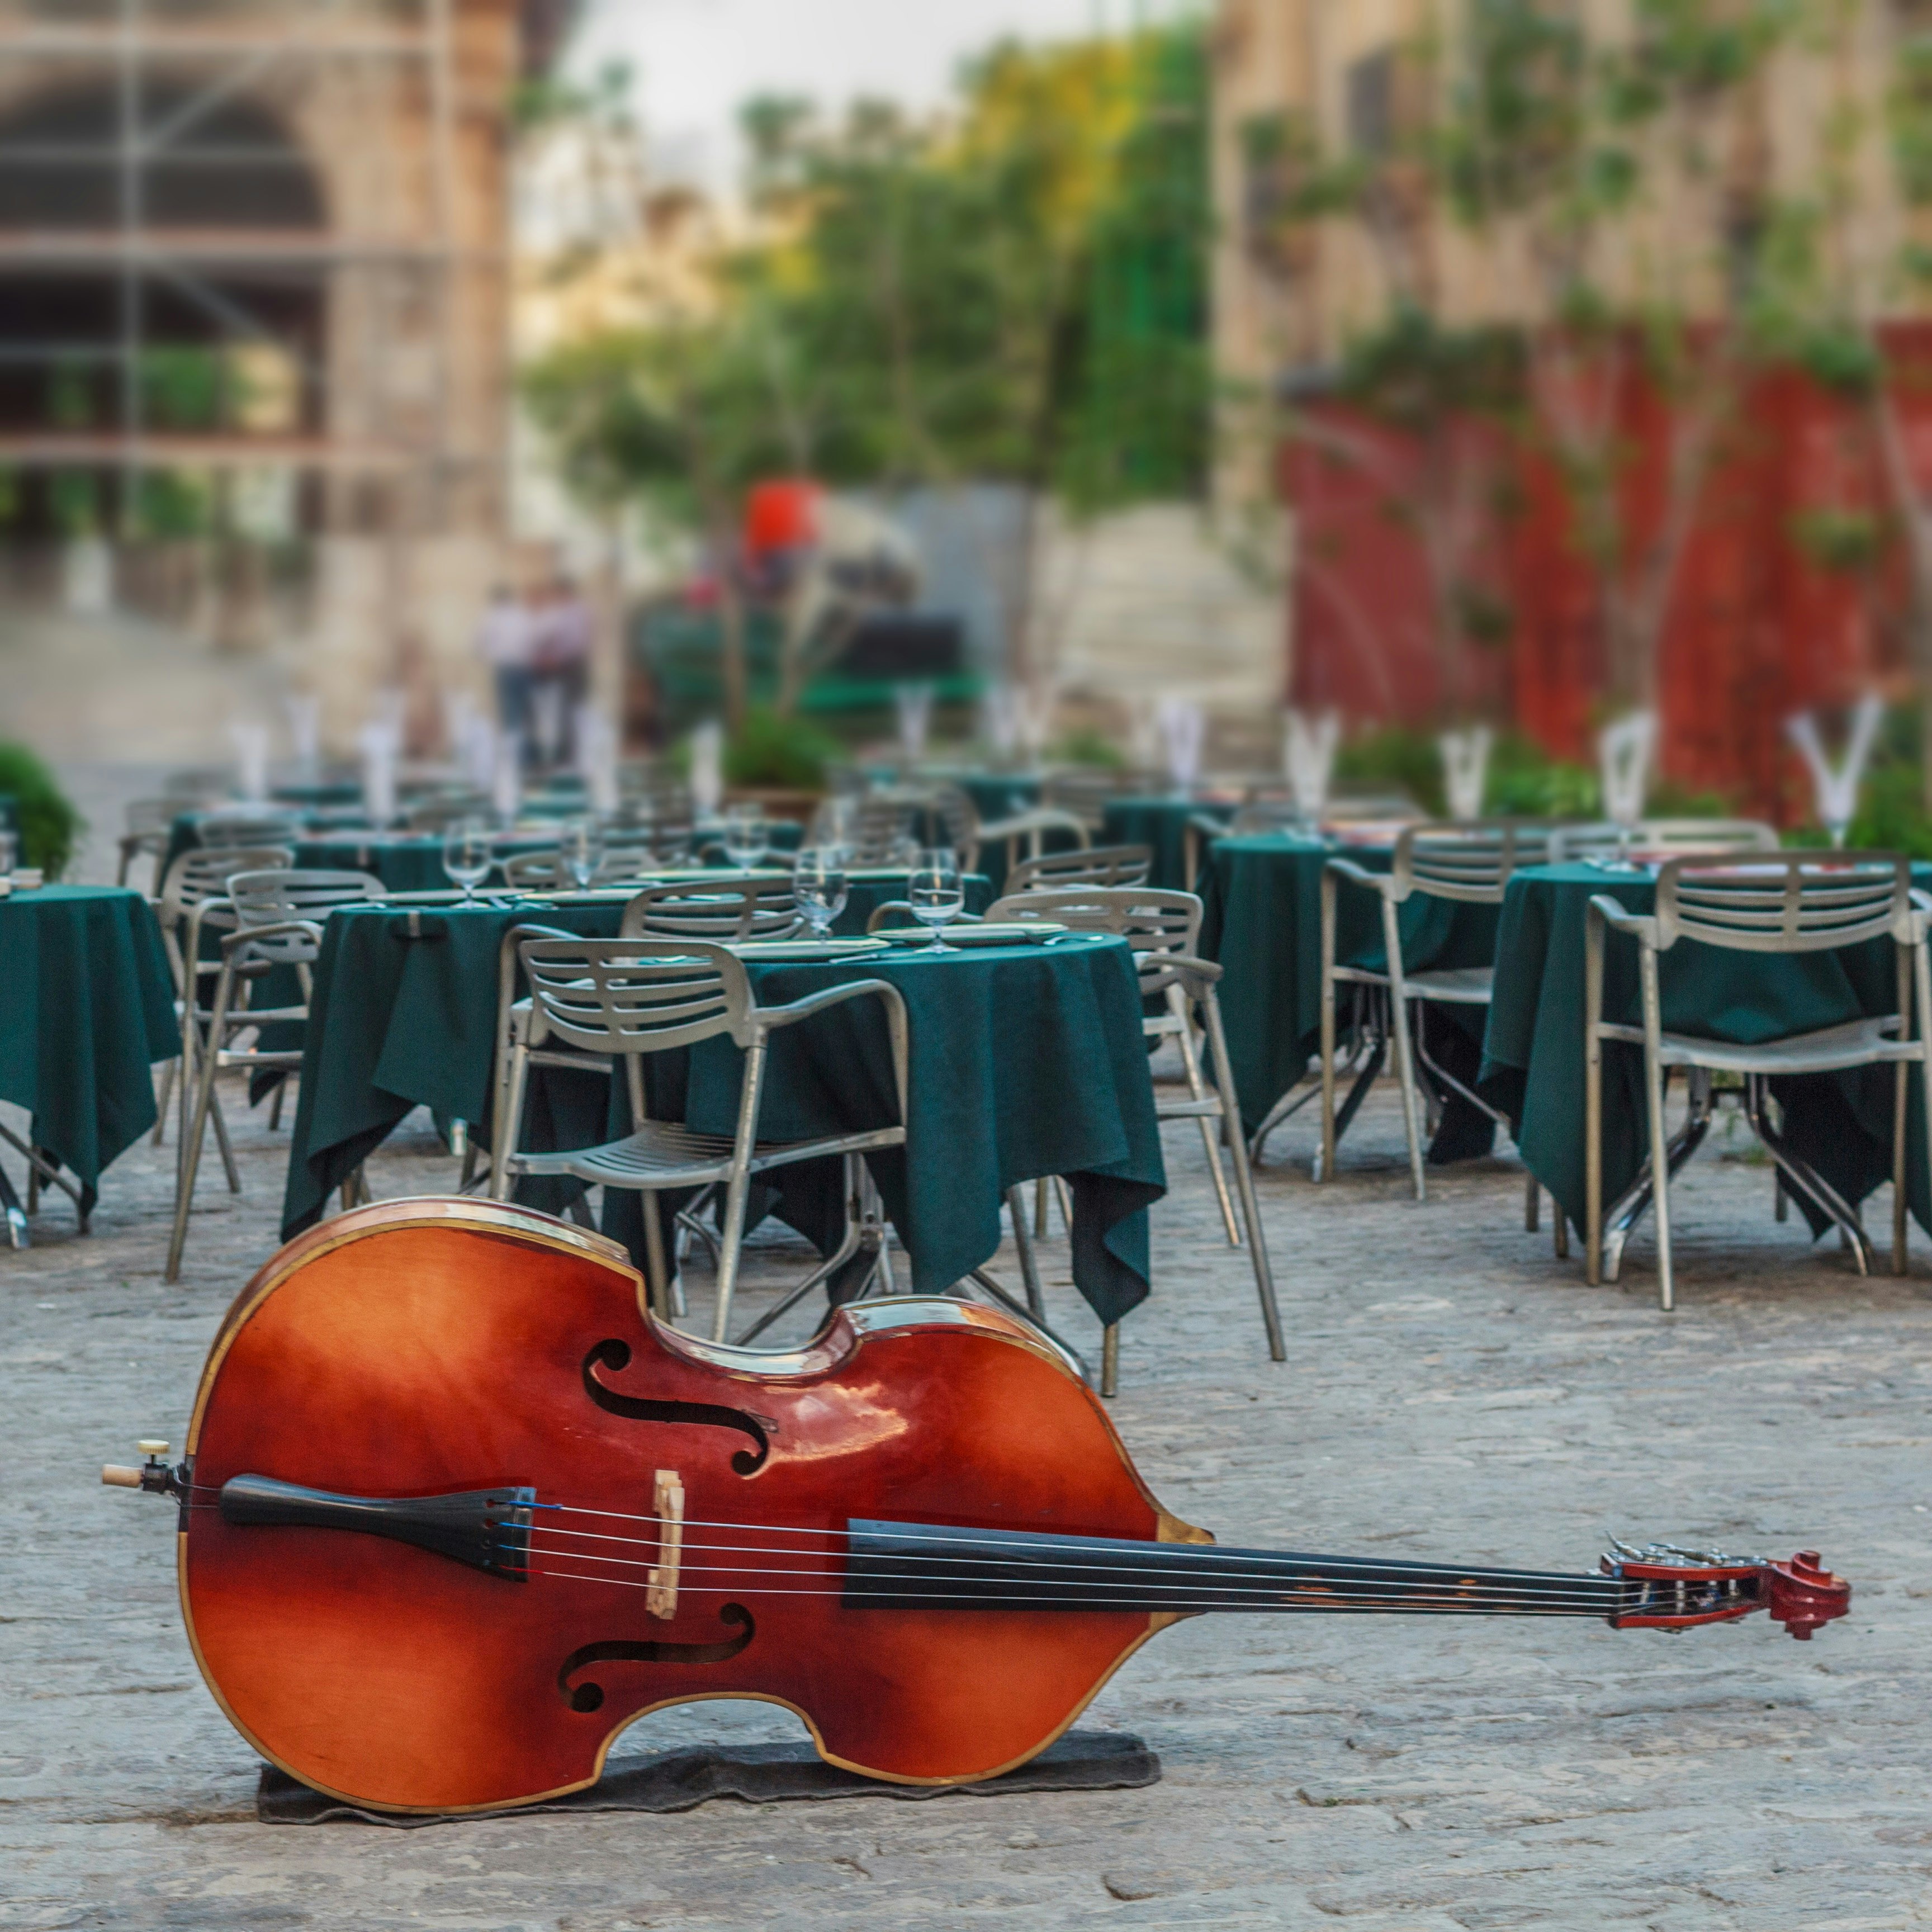 A large cello bass lies on its side in front of a group of tables positioned throughout a open-air cafe; Havana anniversary  